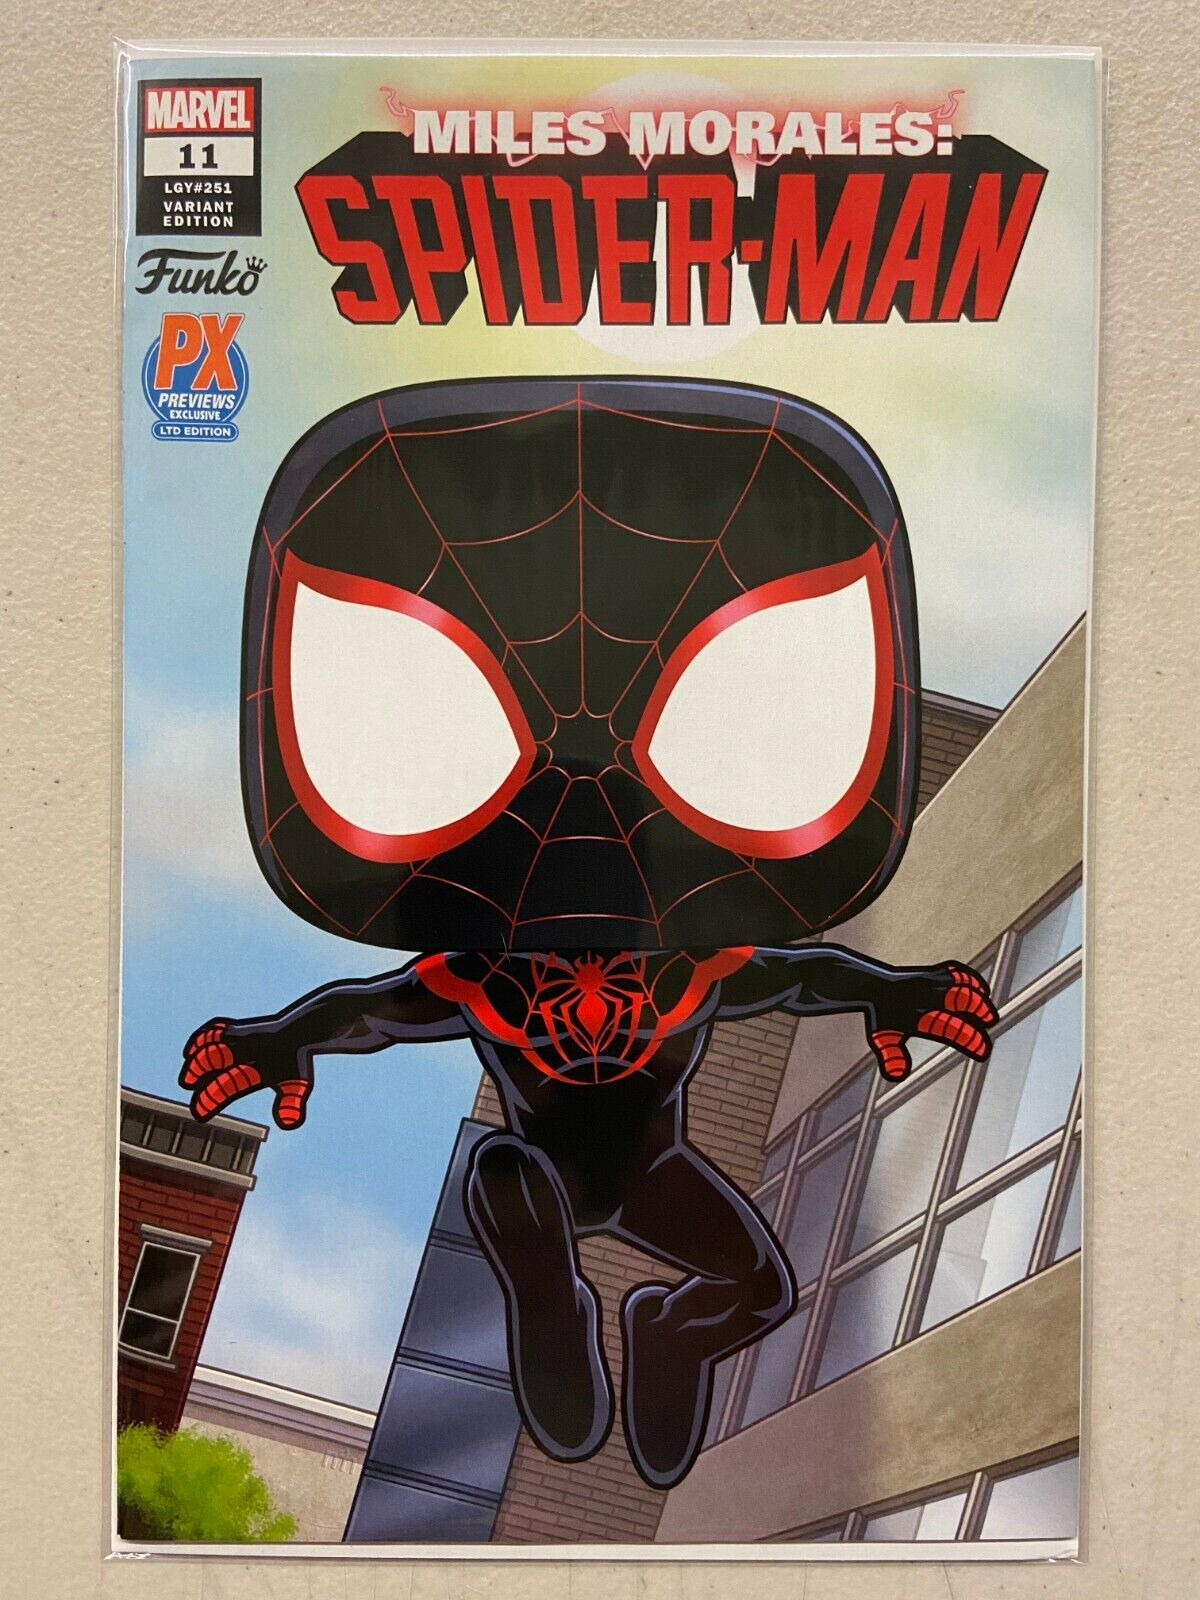 Marvel Miles Morales Spider-Man 11 PX Previews Exclusive Funko Pop Variant Cover